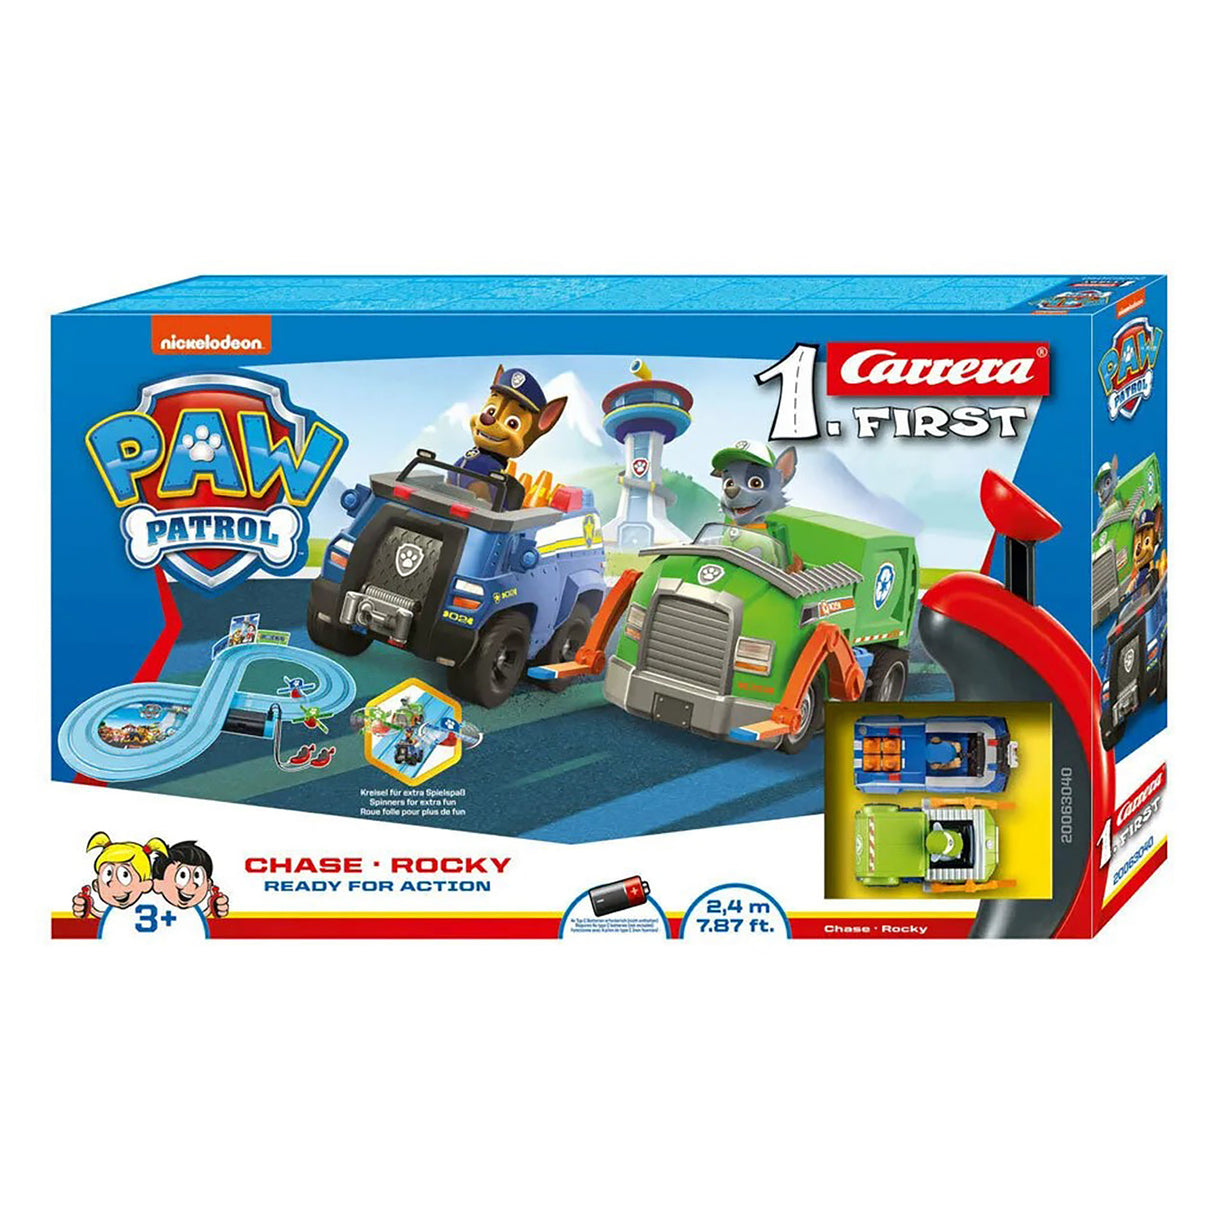 Carrera 63040 First Paw Patrol Ready for Action Slot Car Set